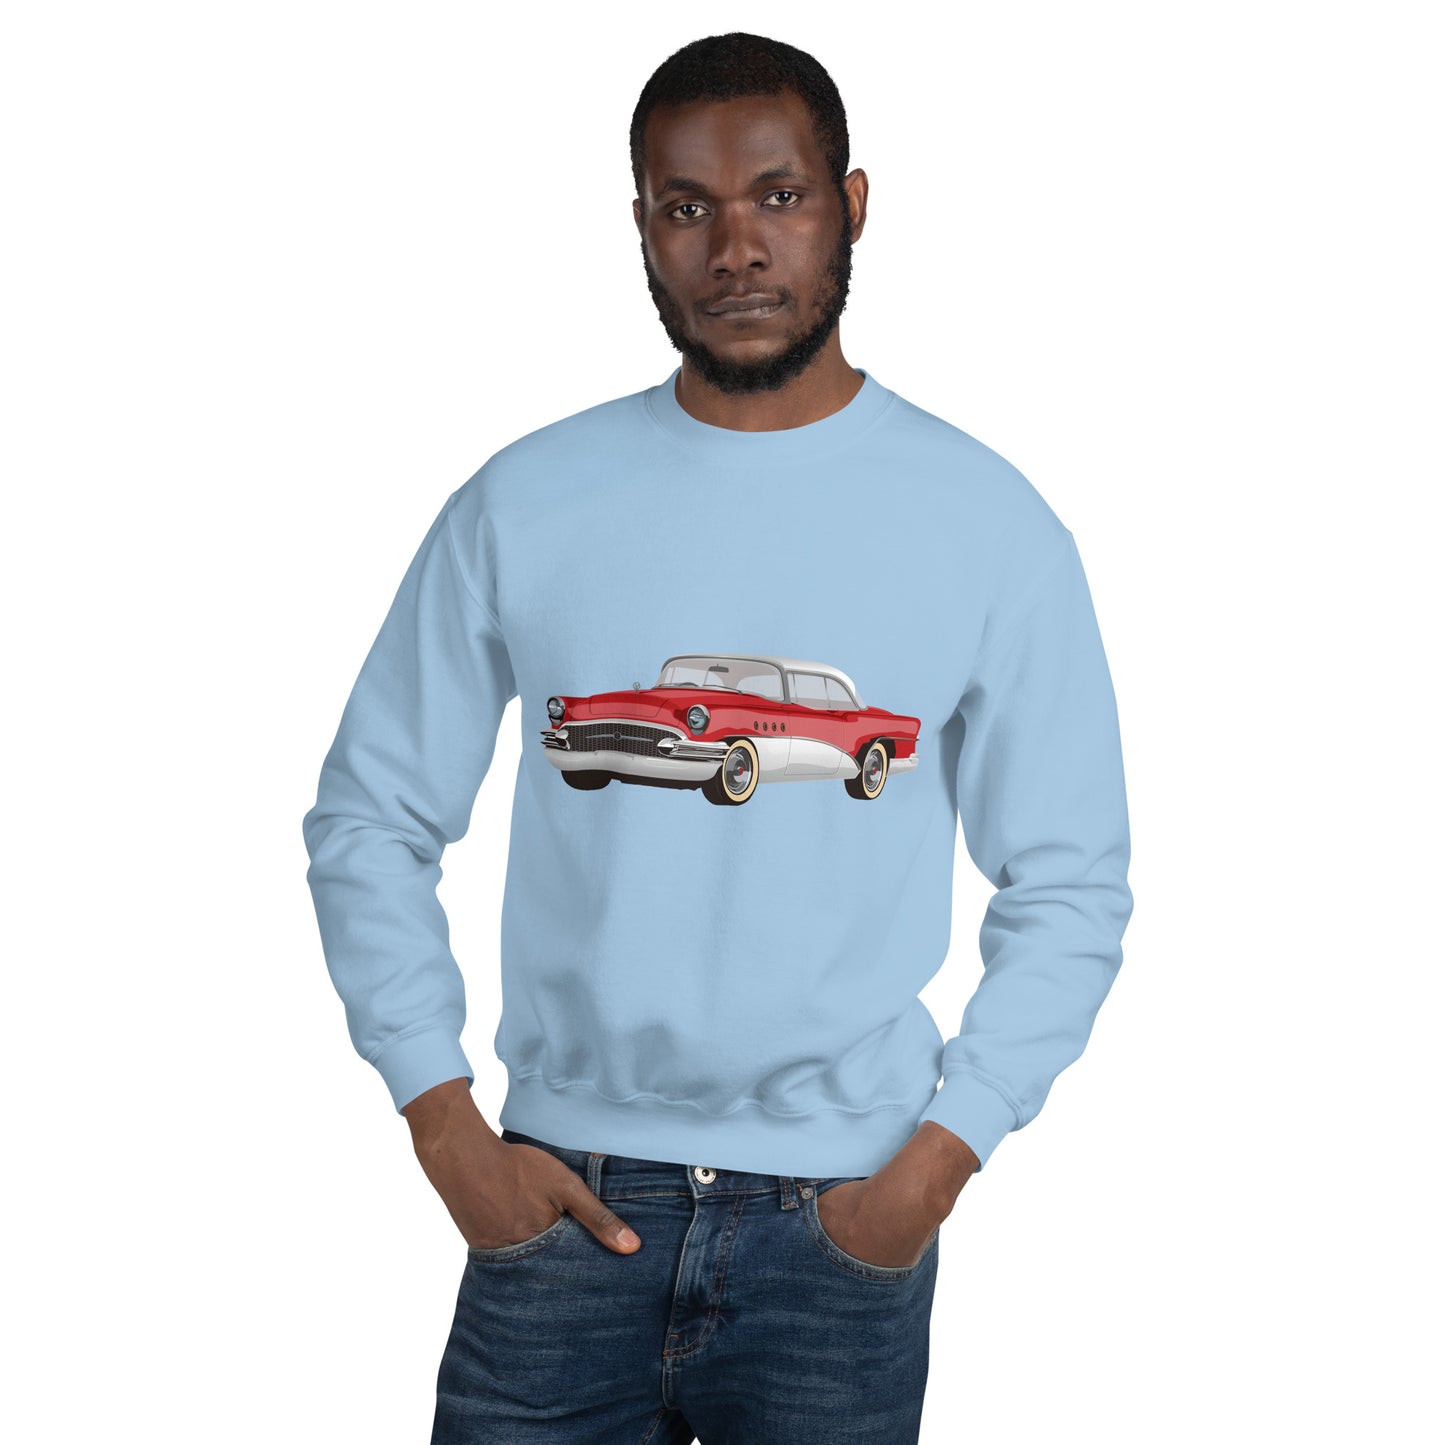 Man with light blue sweatshirt with red chevrolet